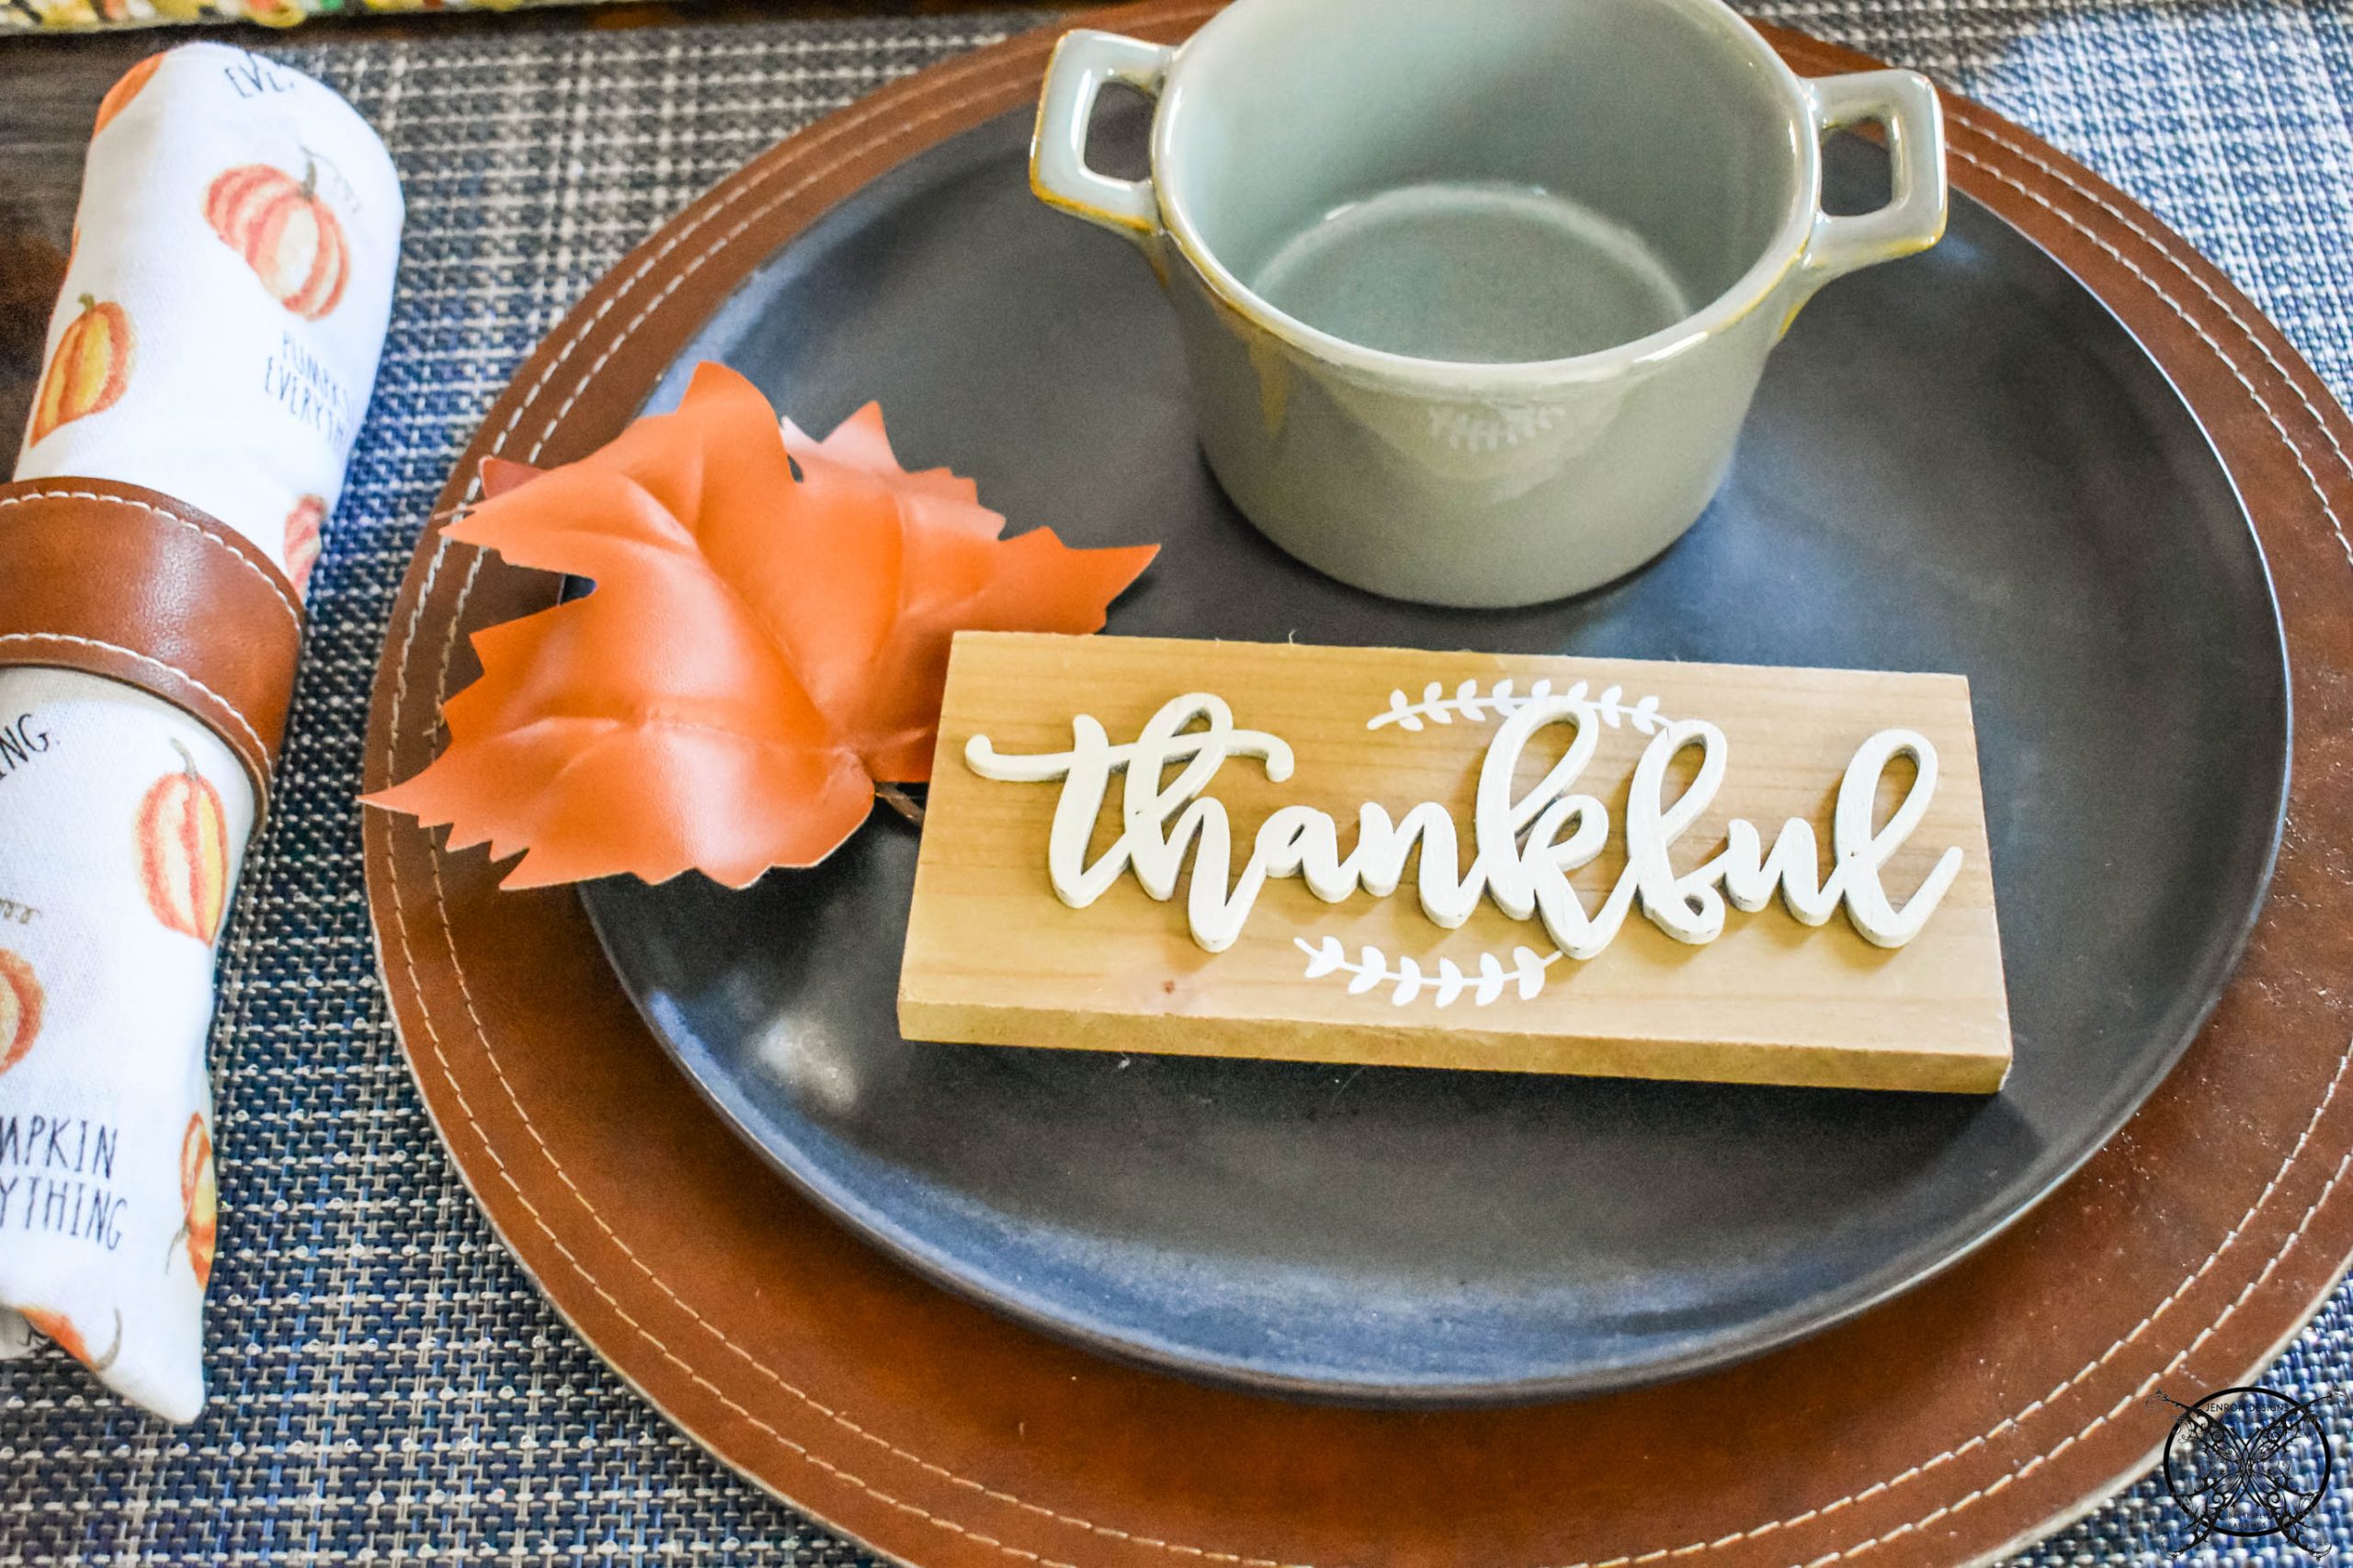 Gobblers Thankful Table JENRON DESIGNS.